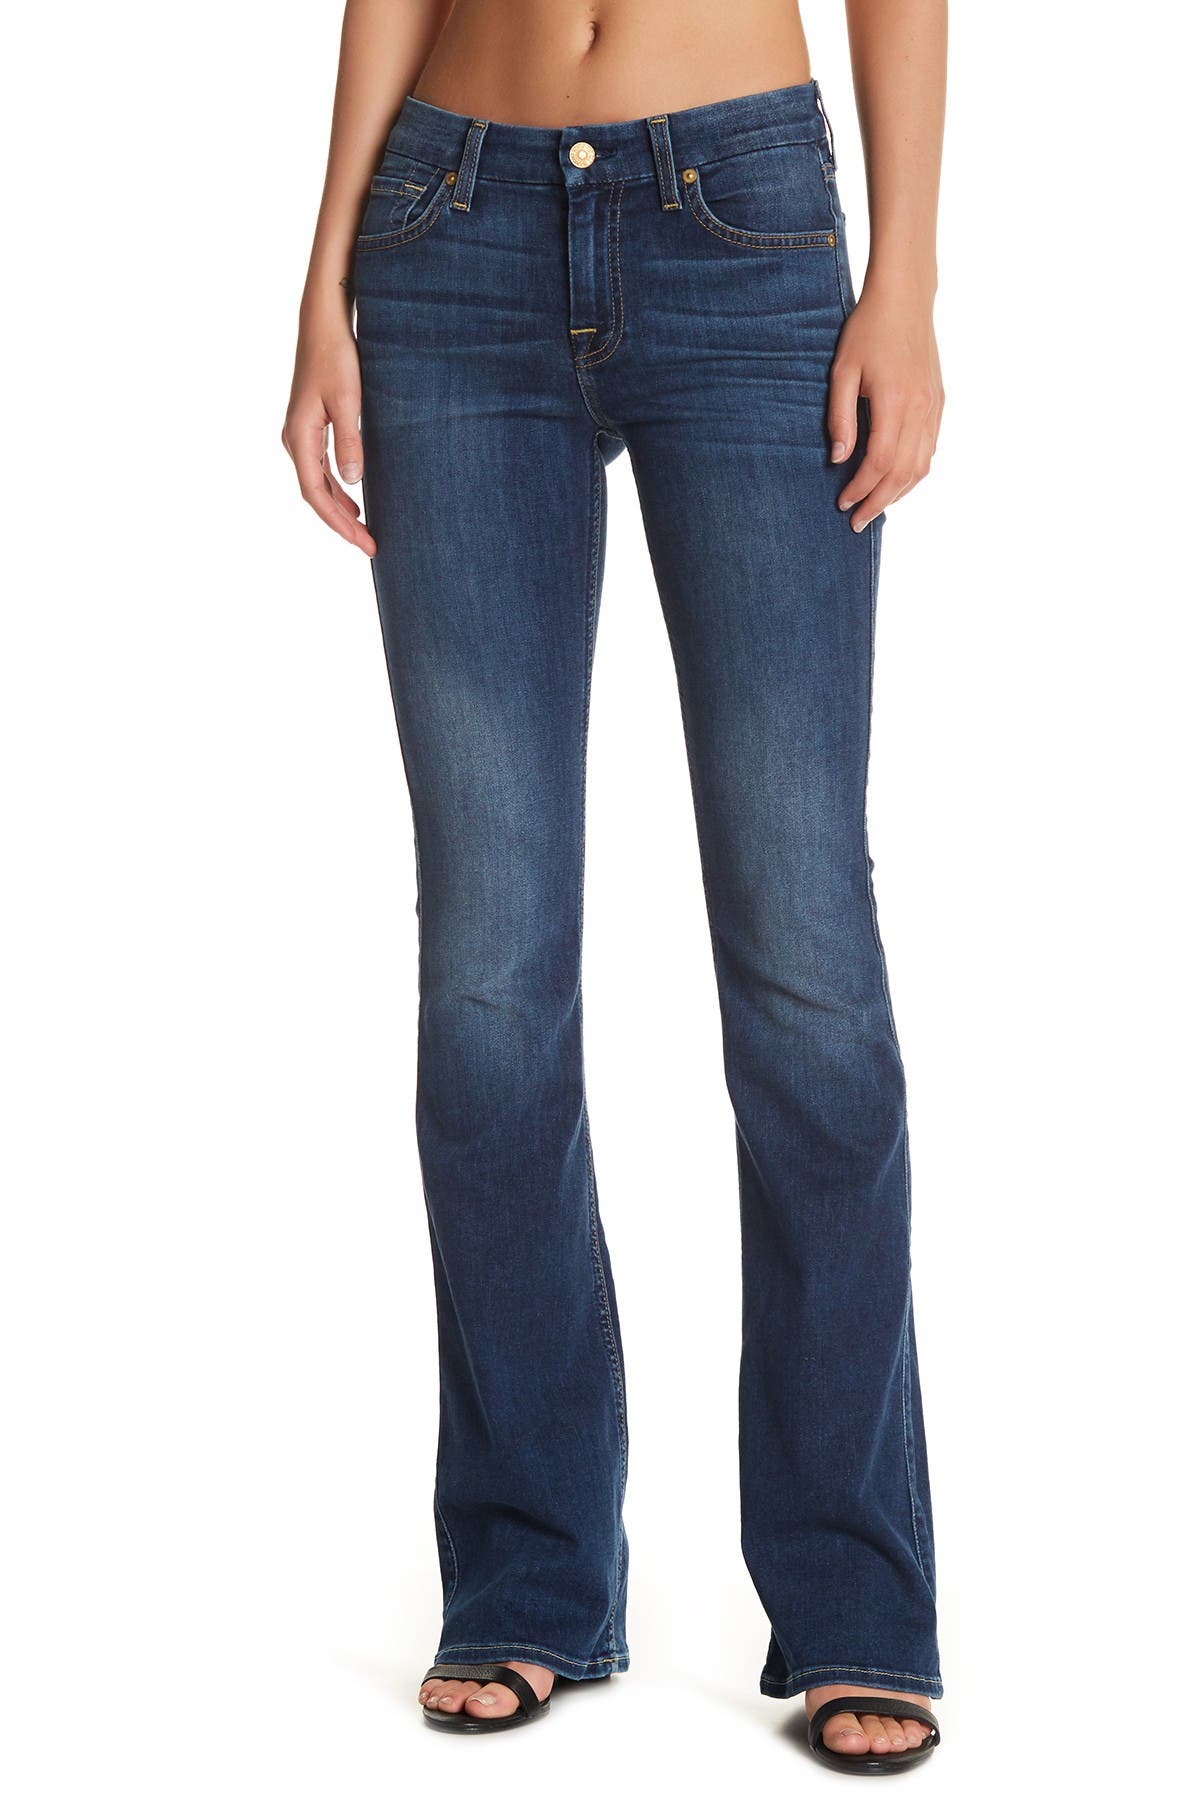 seven for all mankind flare